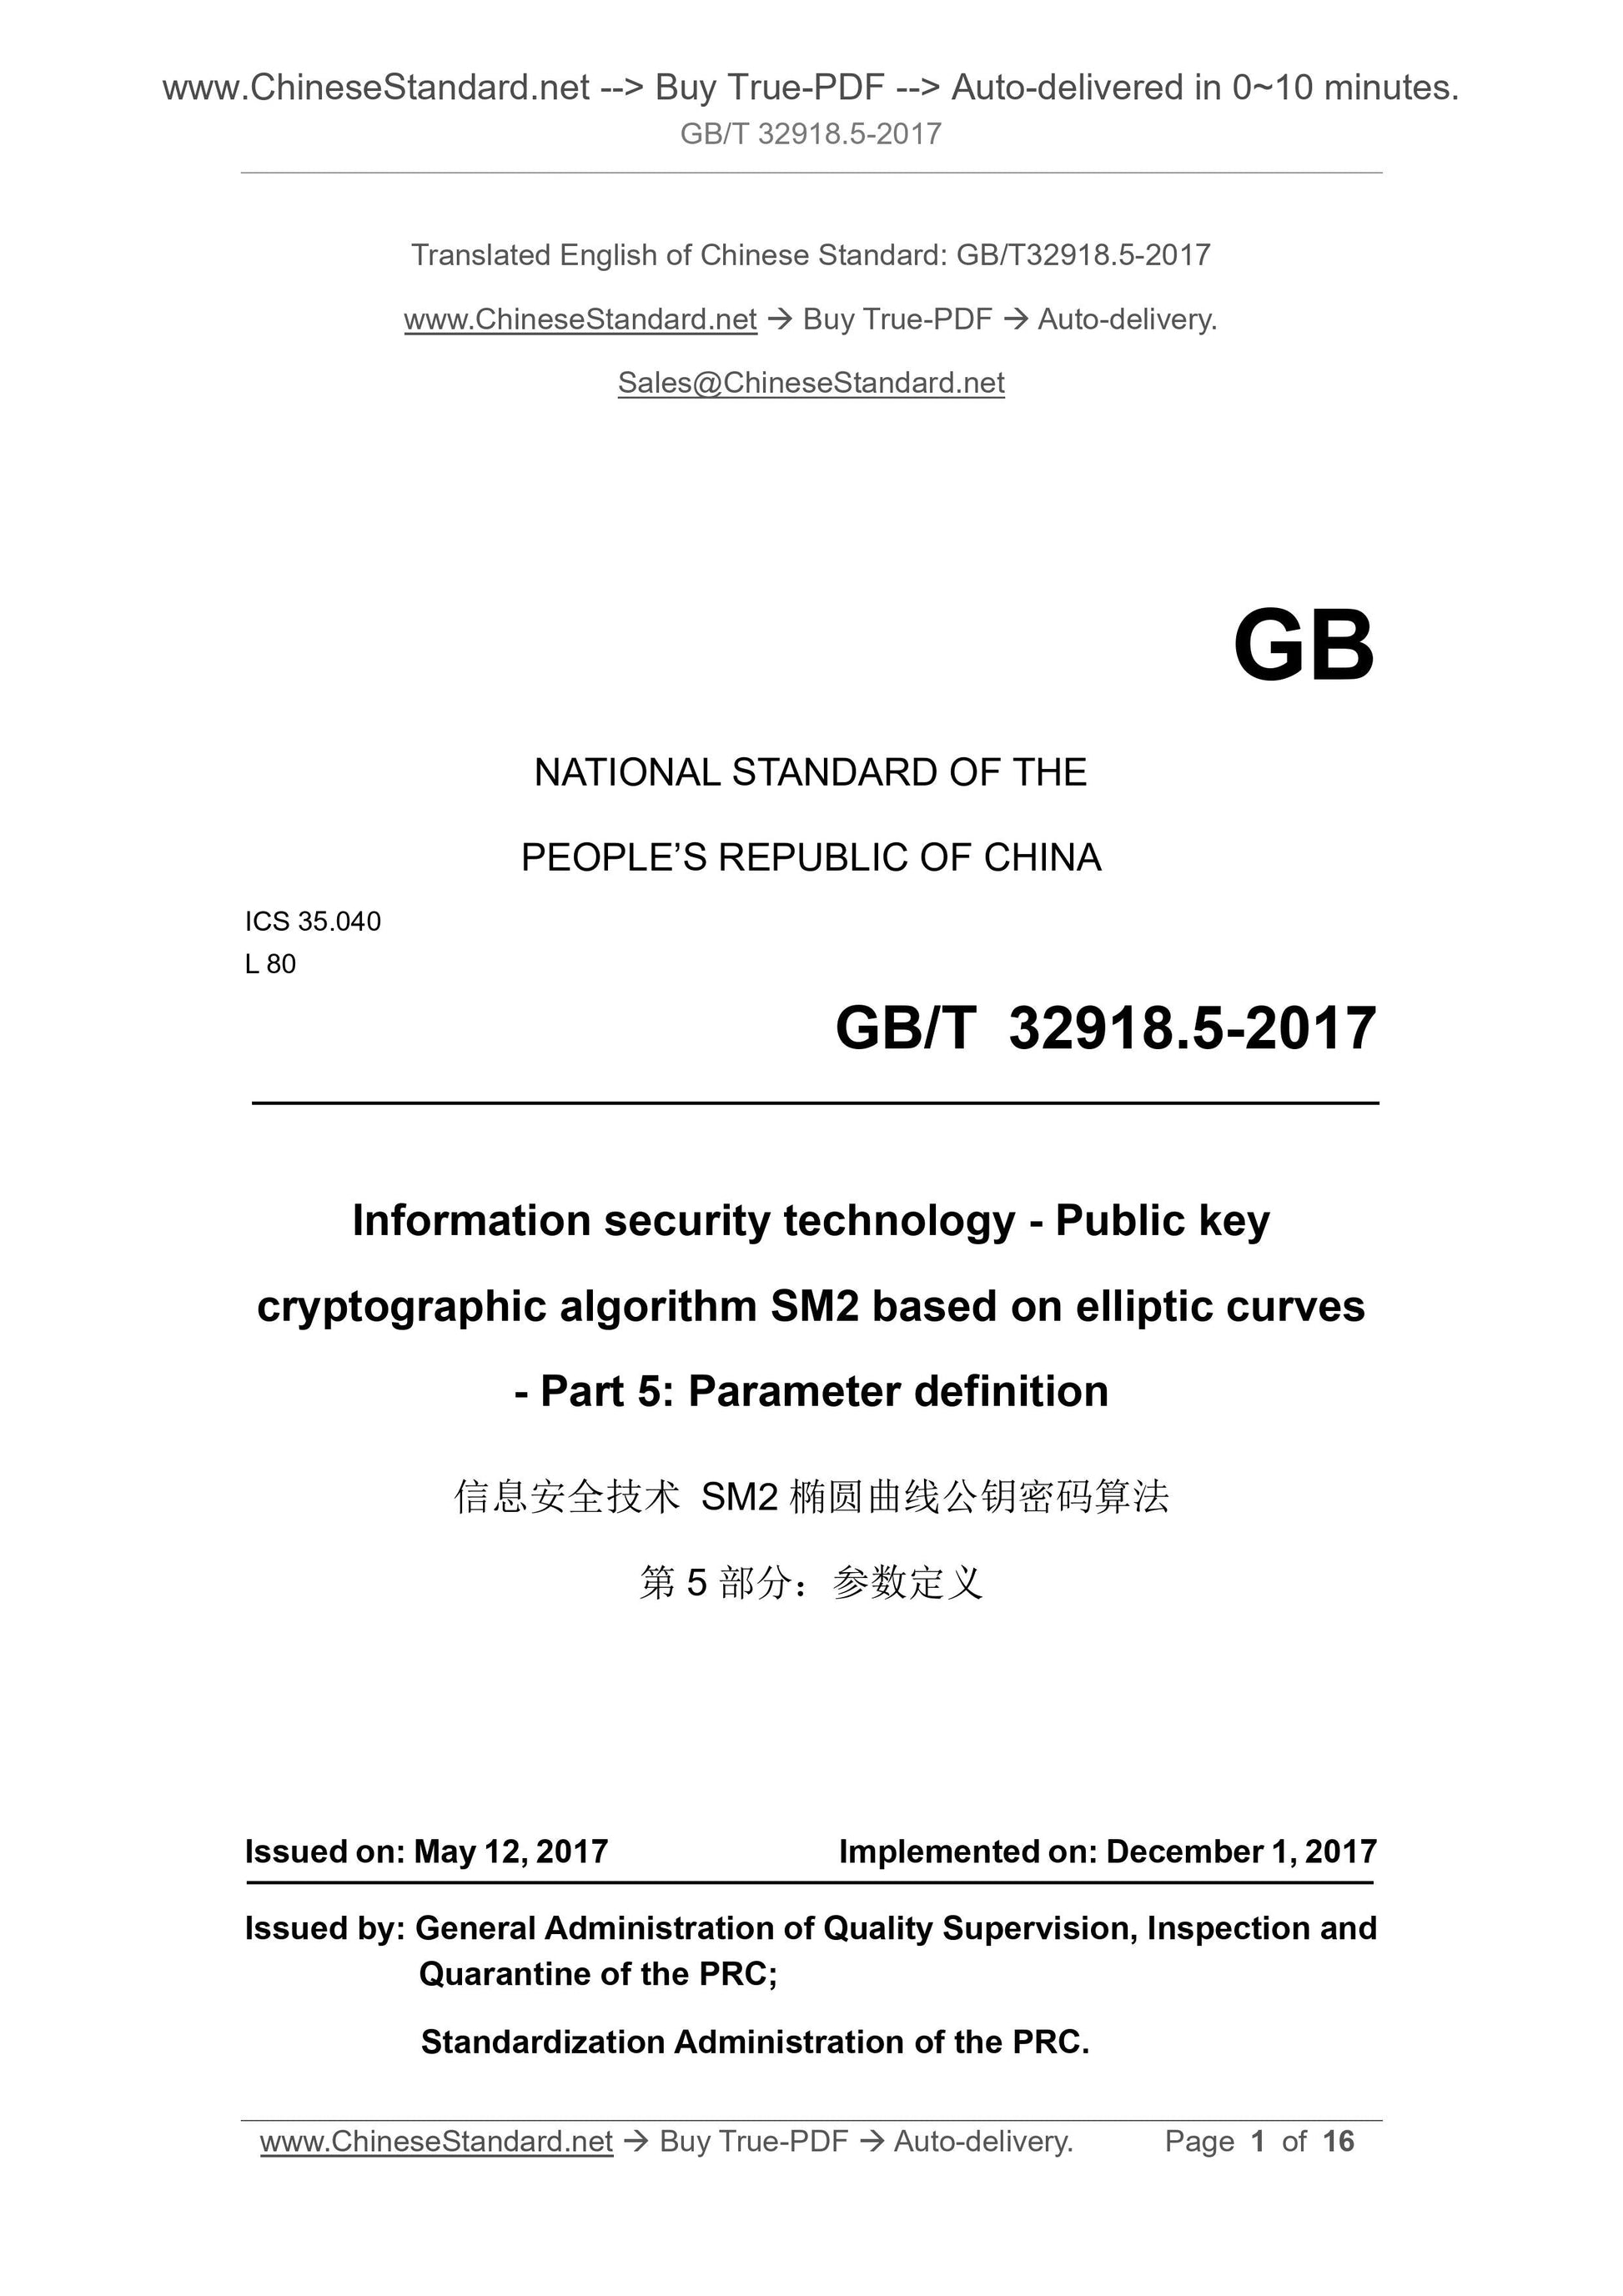 GB/T 32918.5-2017 Page 1